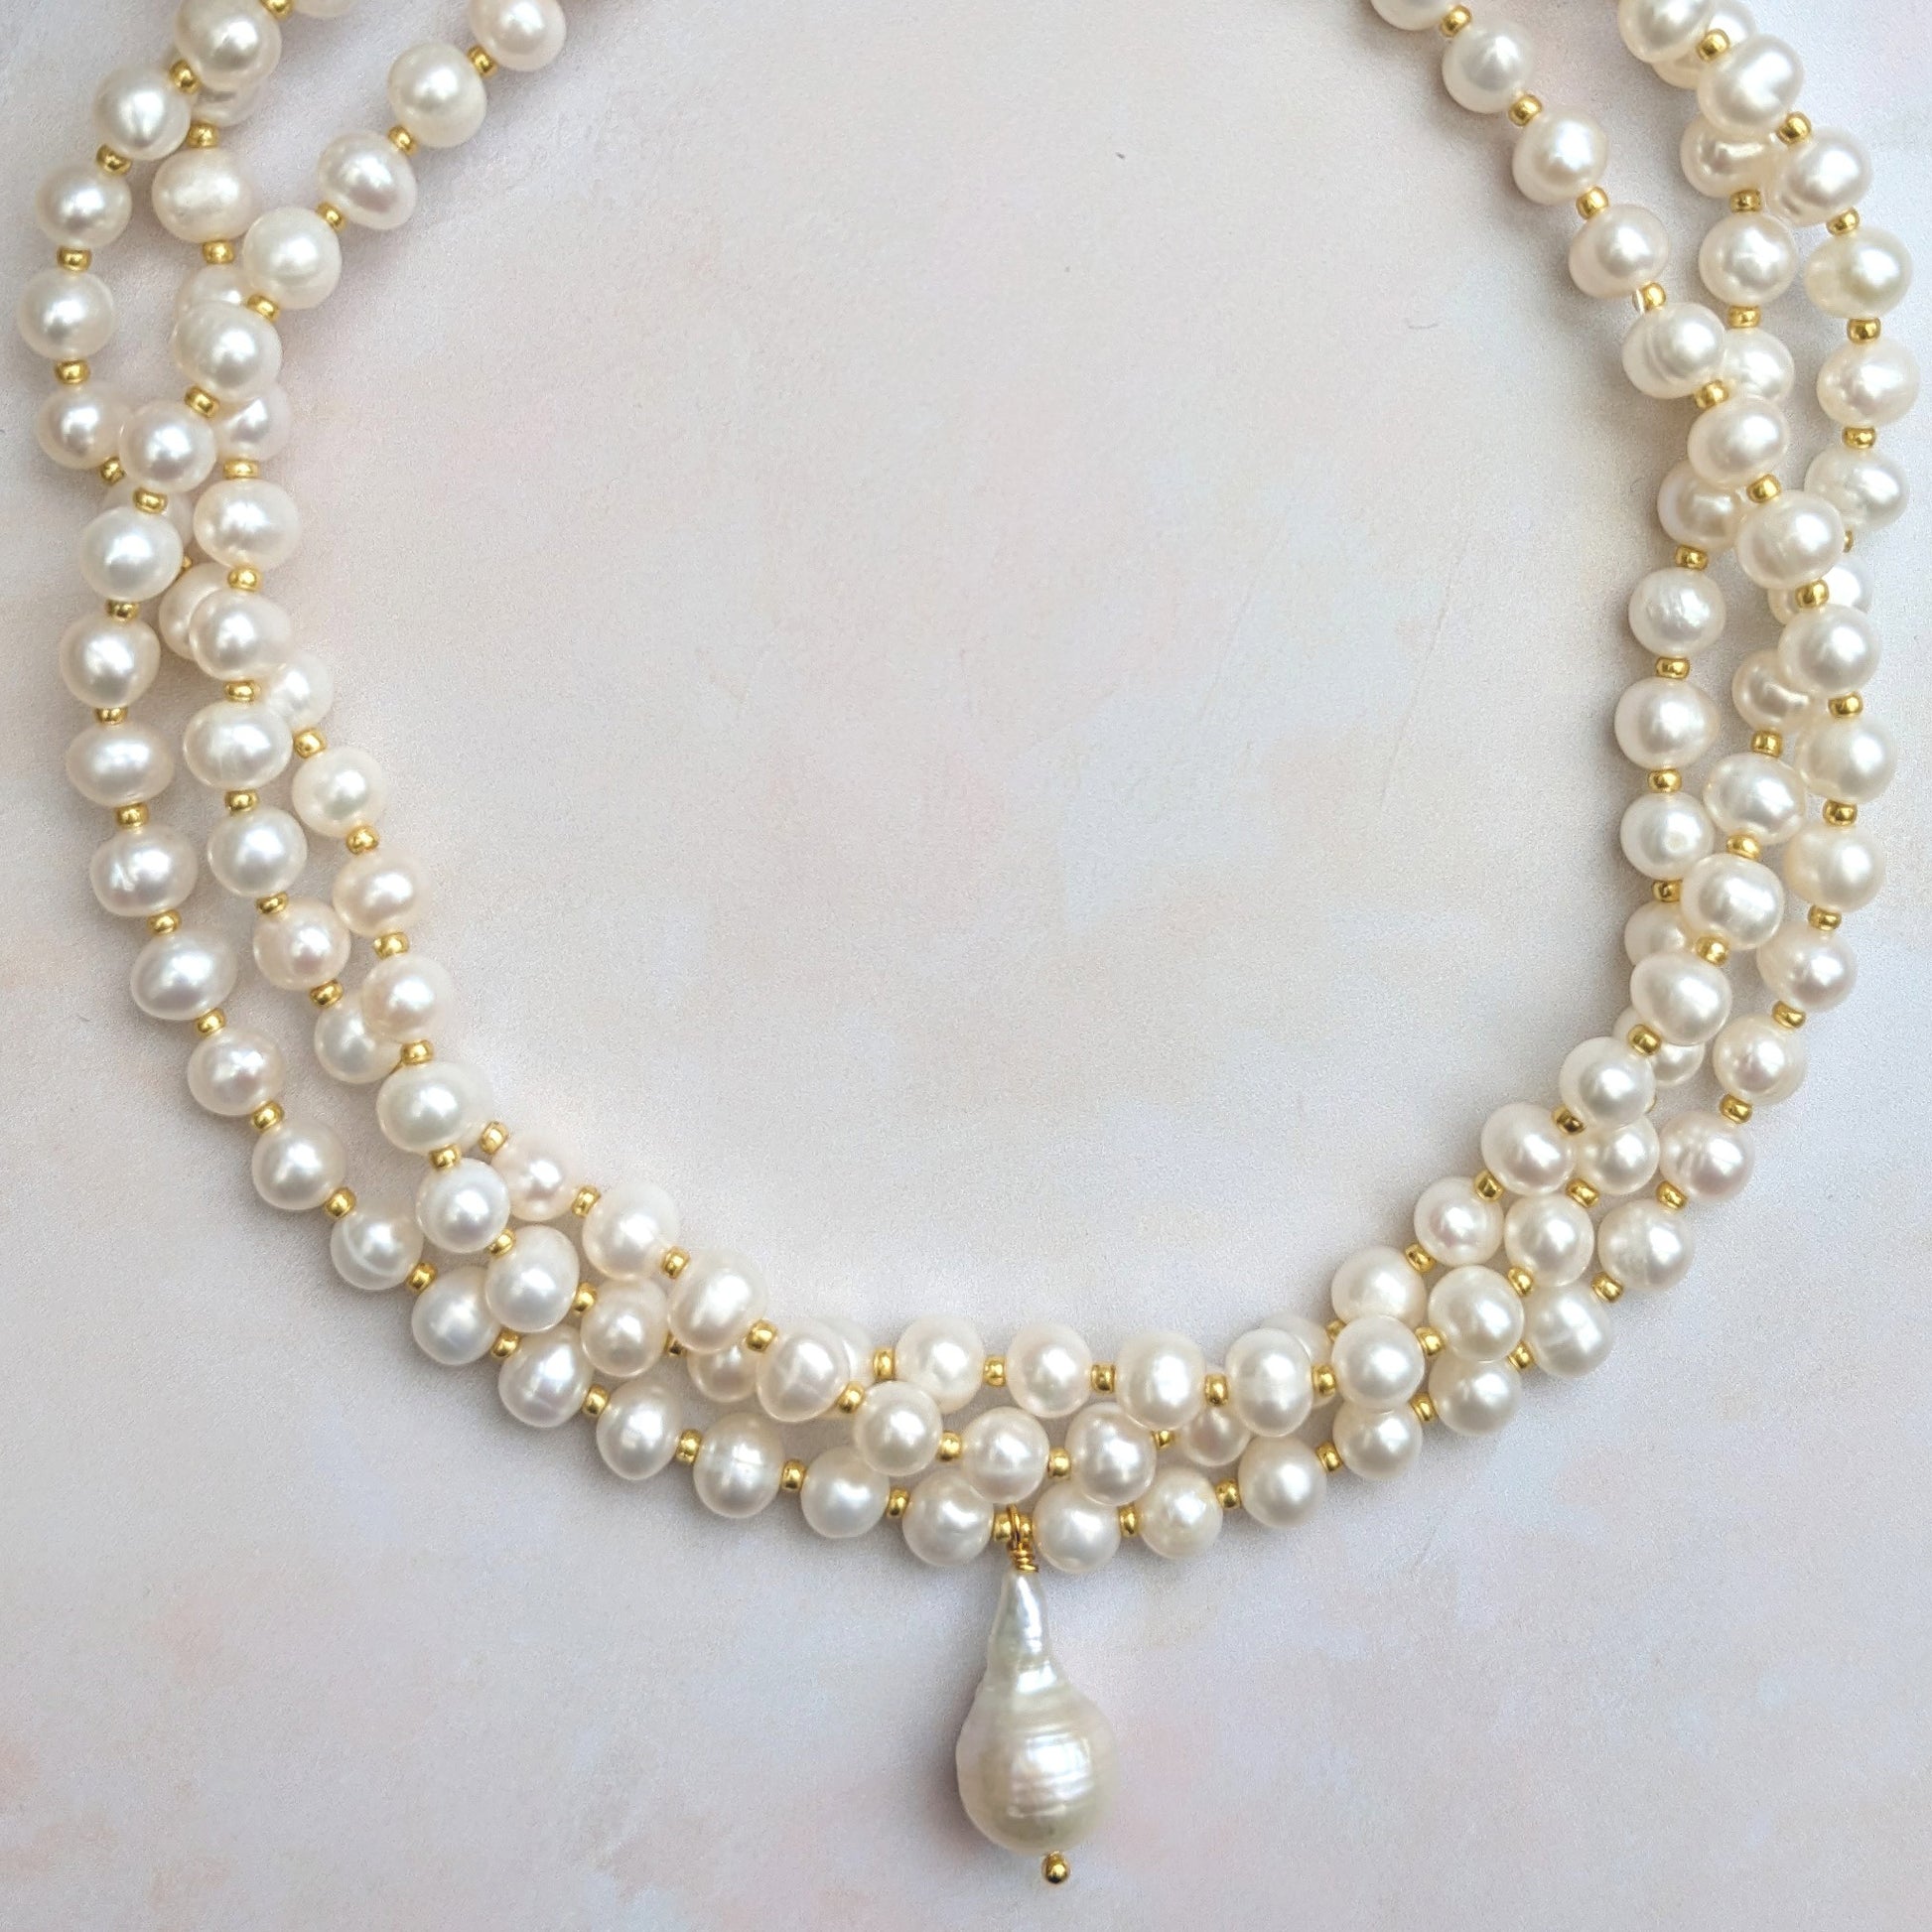 Pearl choker necklace for brides - Susie Warner